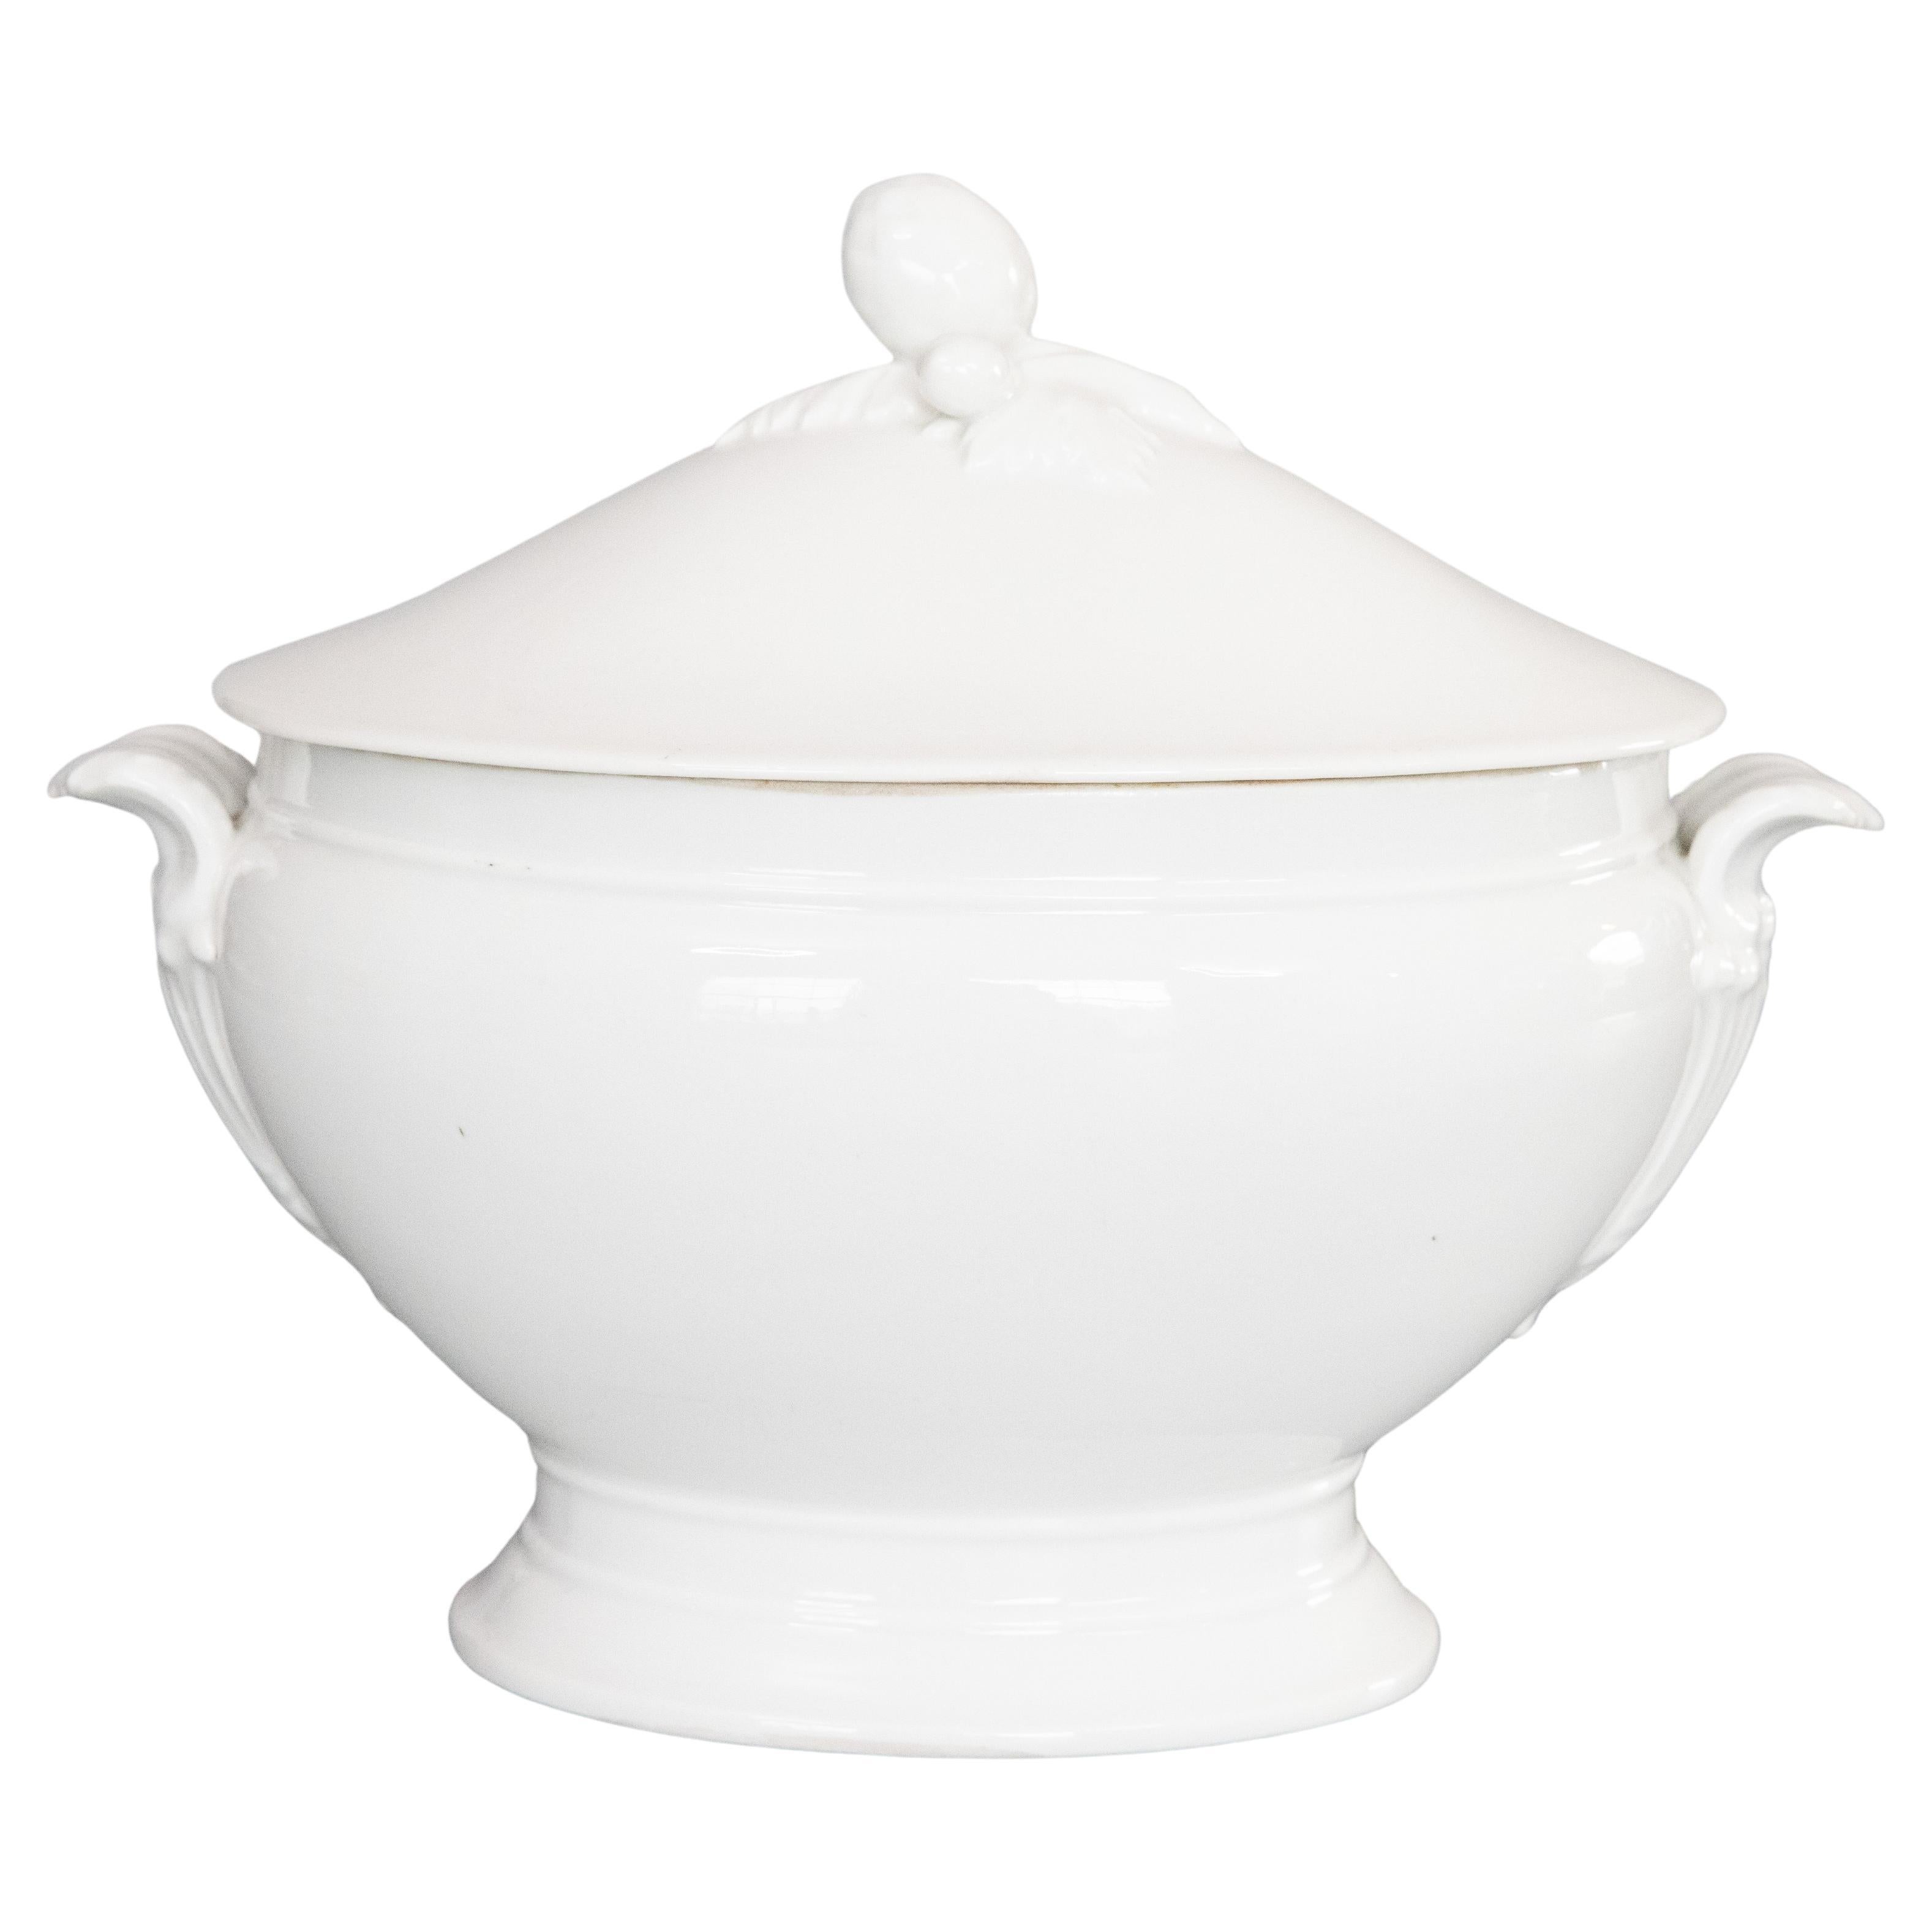 Antique French White Ironstone Oval Lidded Soup Tureen Soupière For Sale